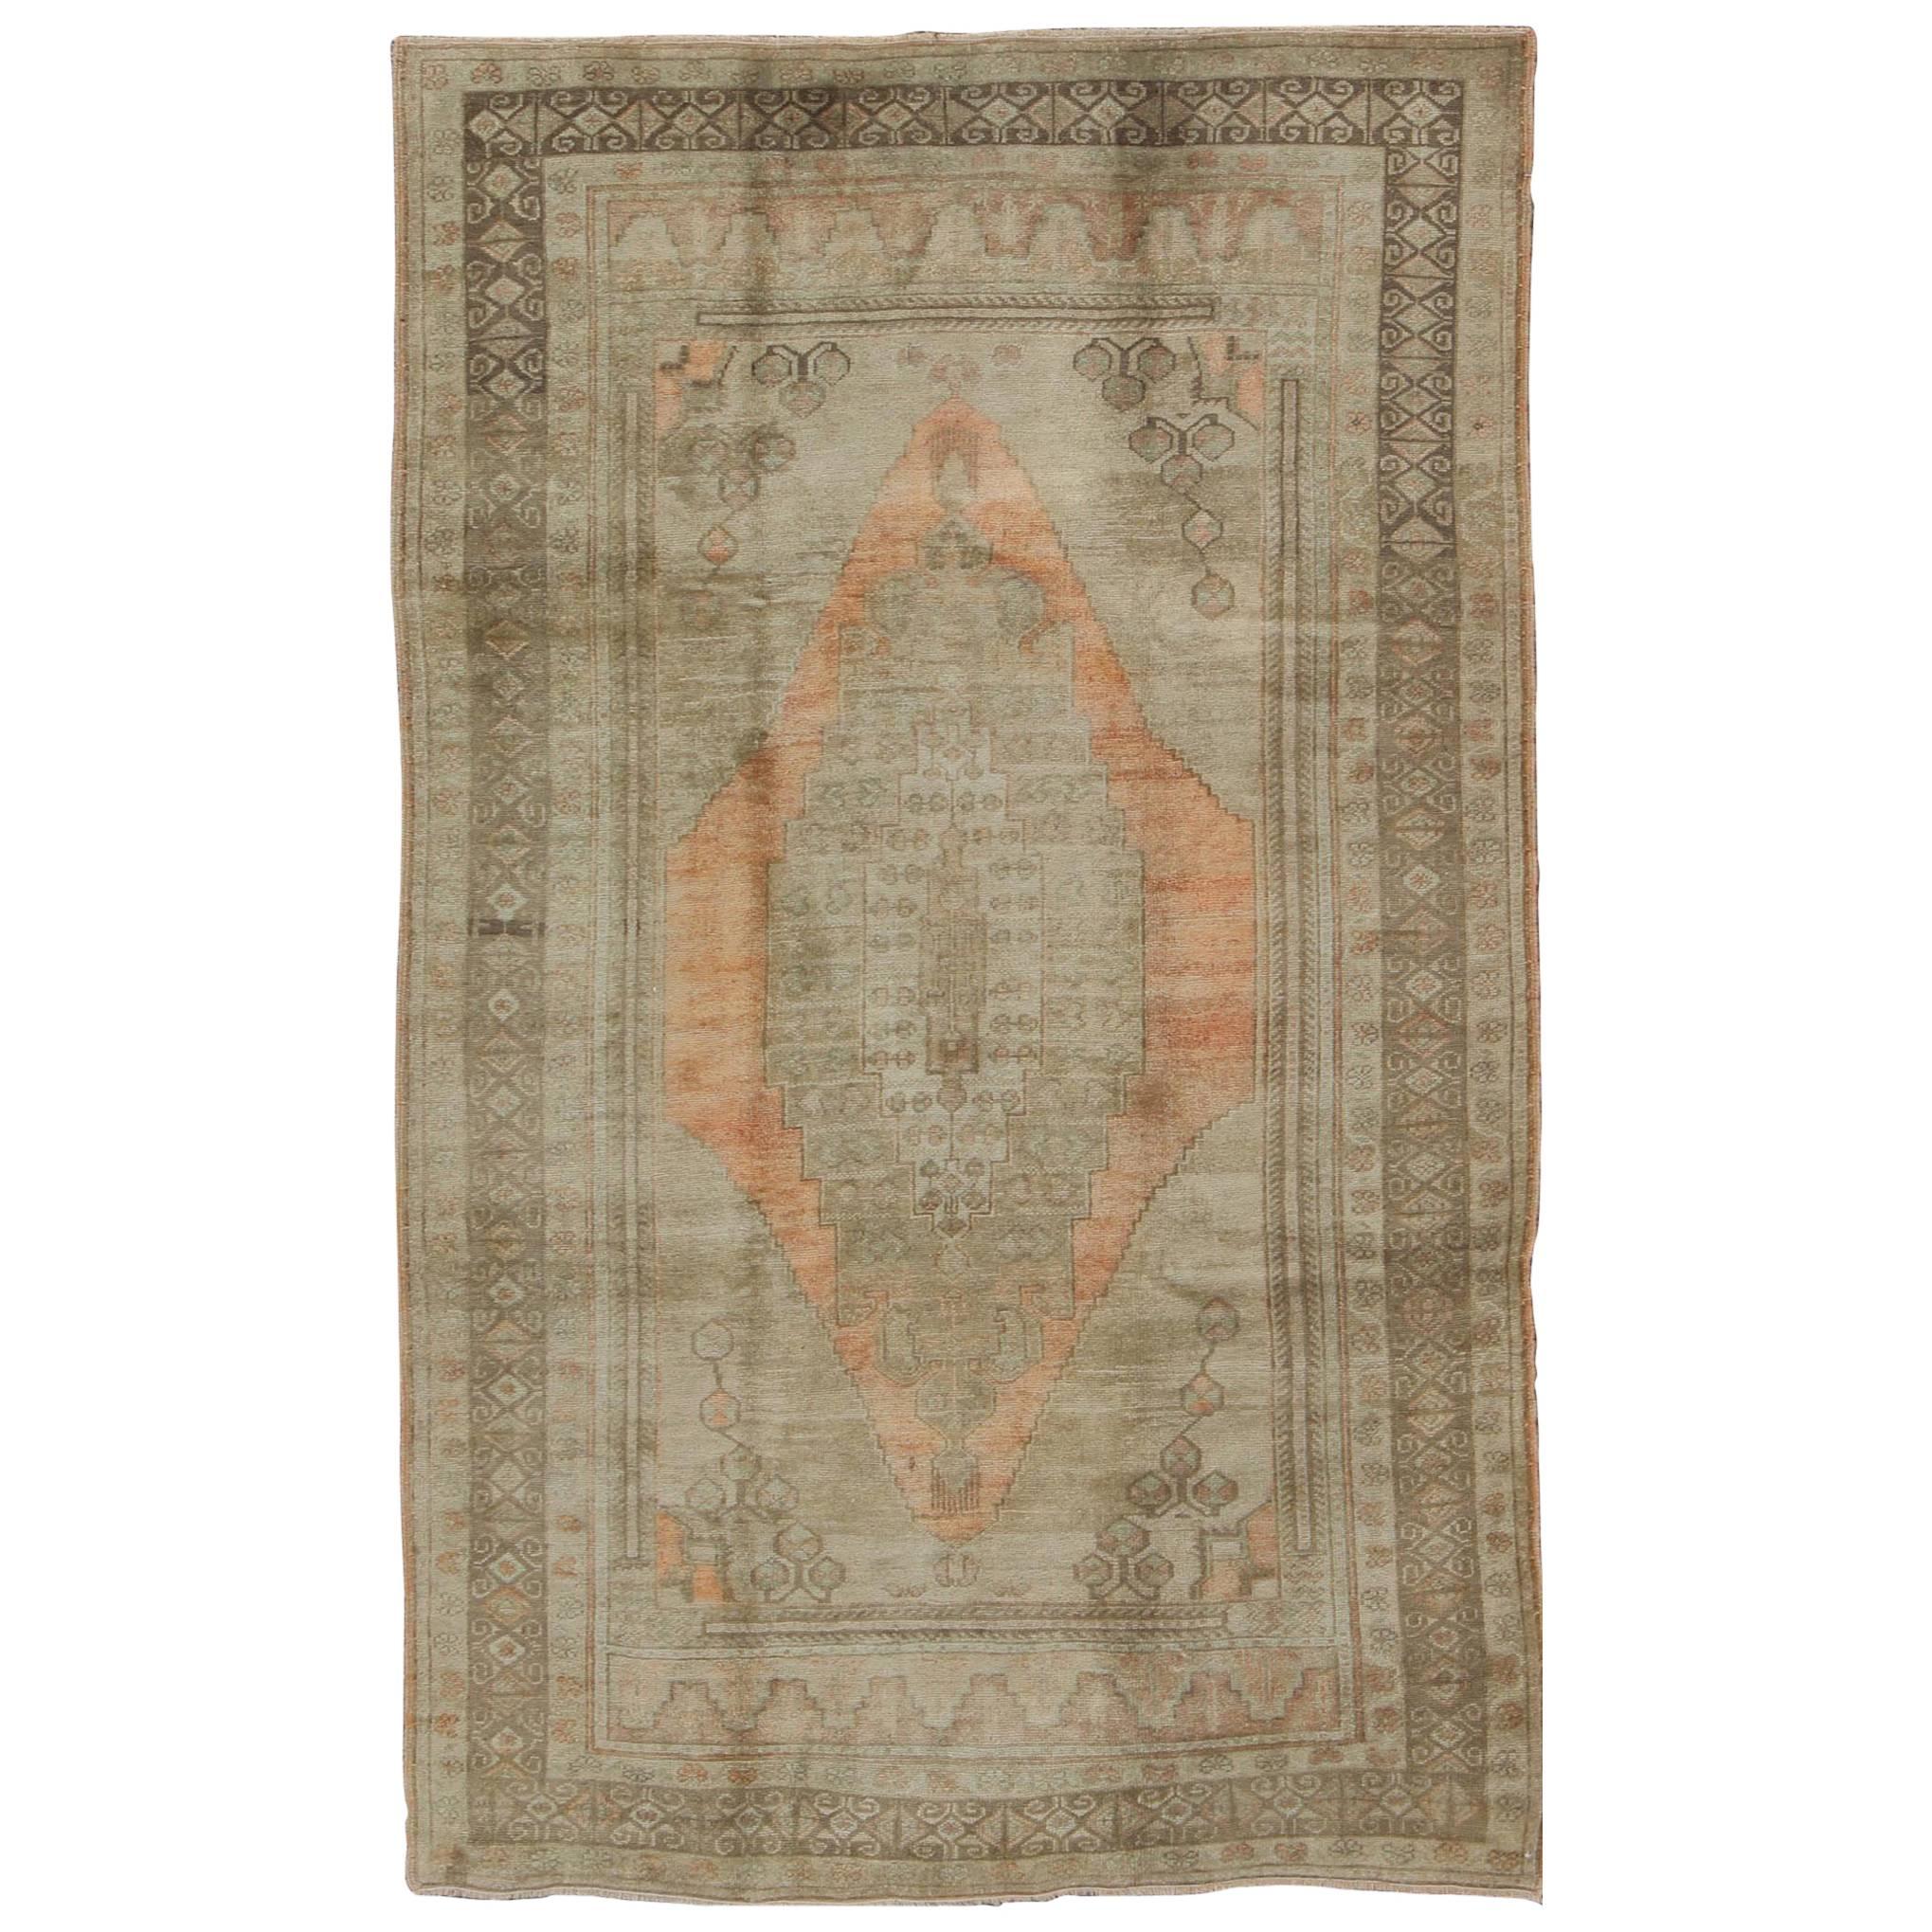 1940s Taupe Vintage Oushak Rug from Turkey with Light Salmon / Coral Medallion